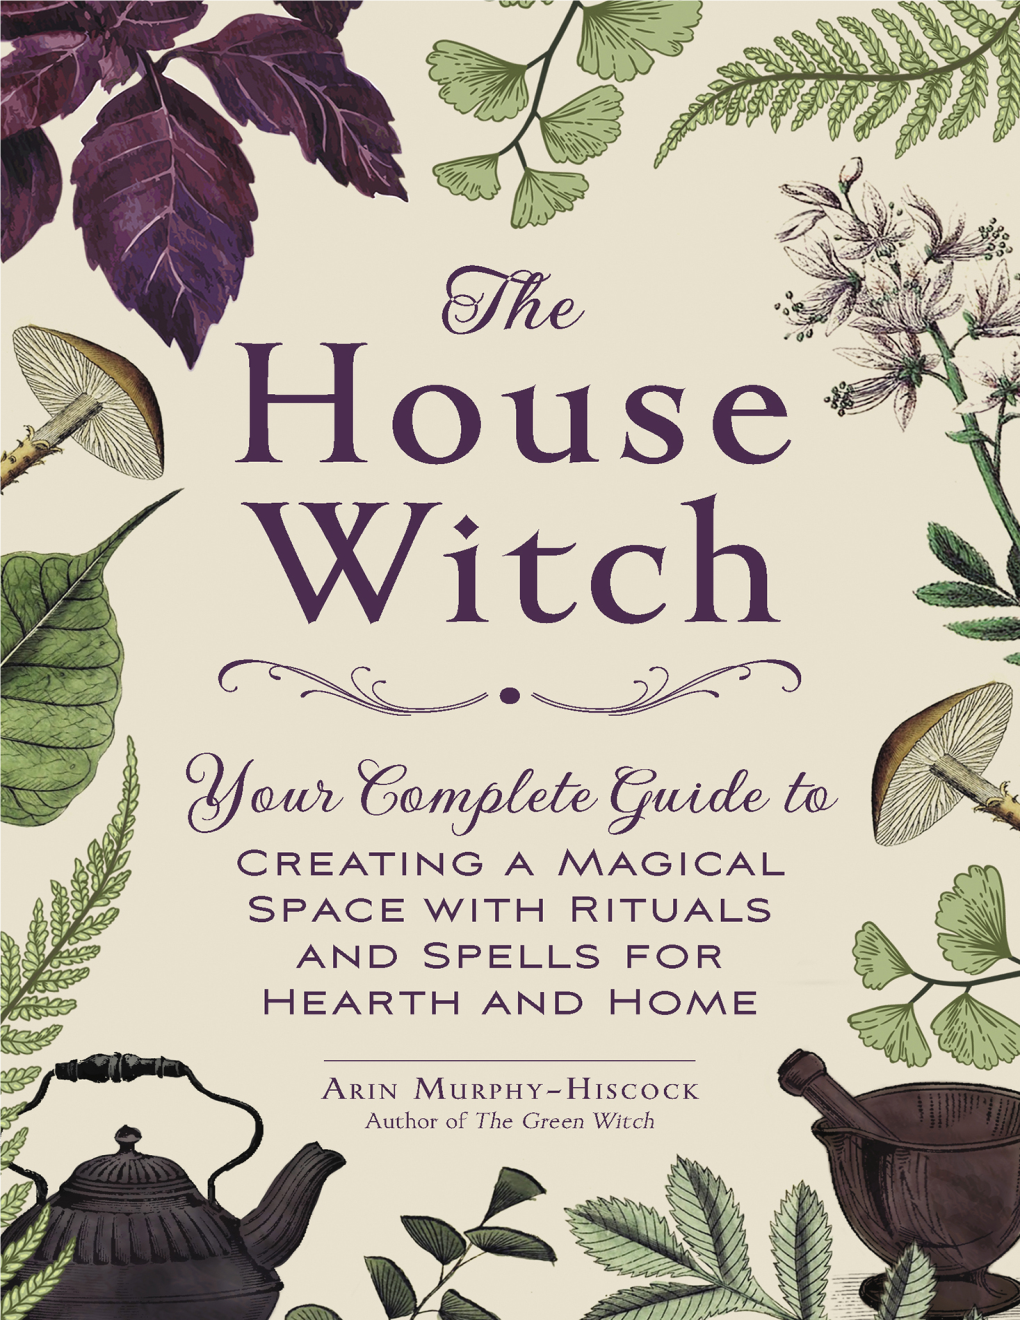 The House Witch: Your Complete Guide to Creating a Magical Space